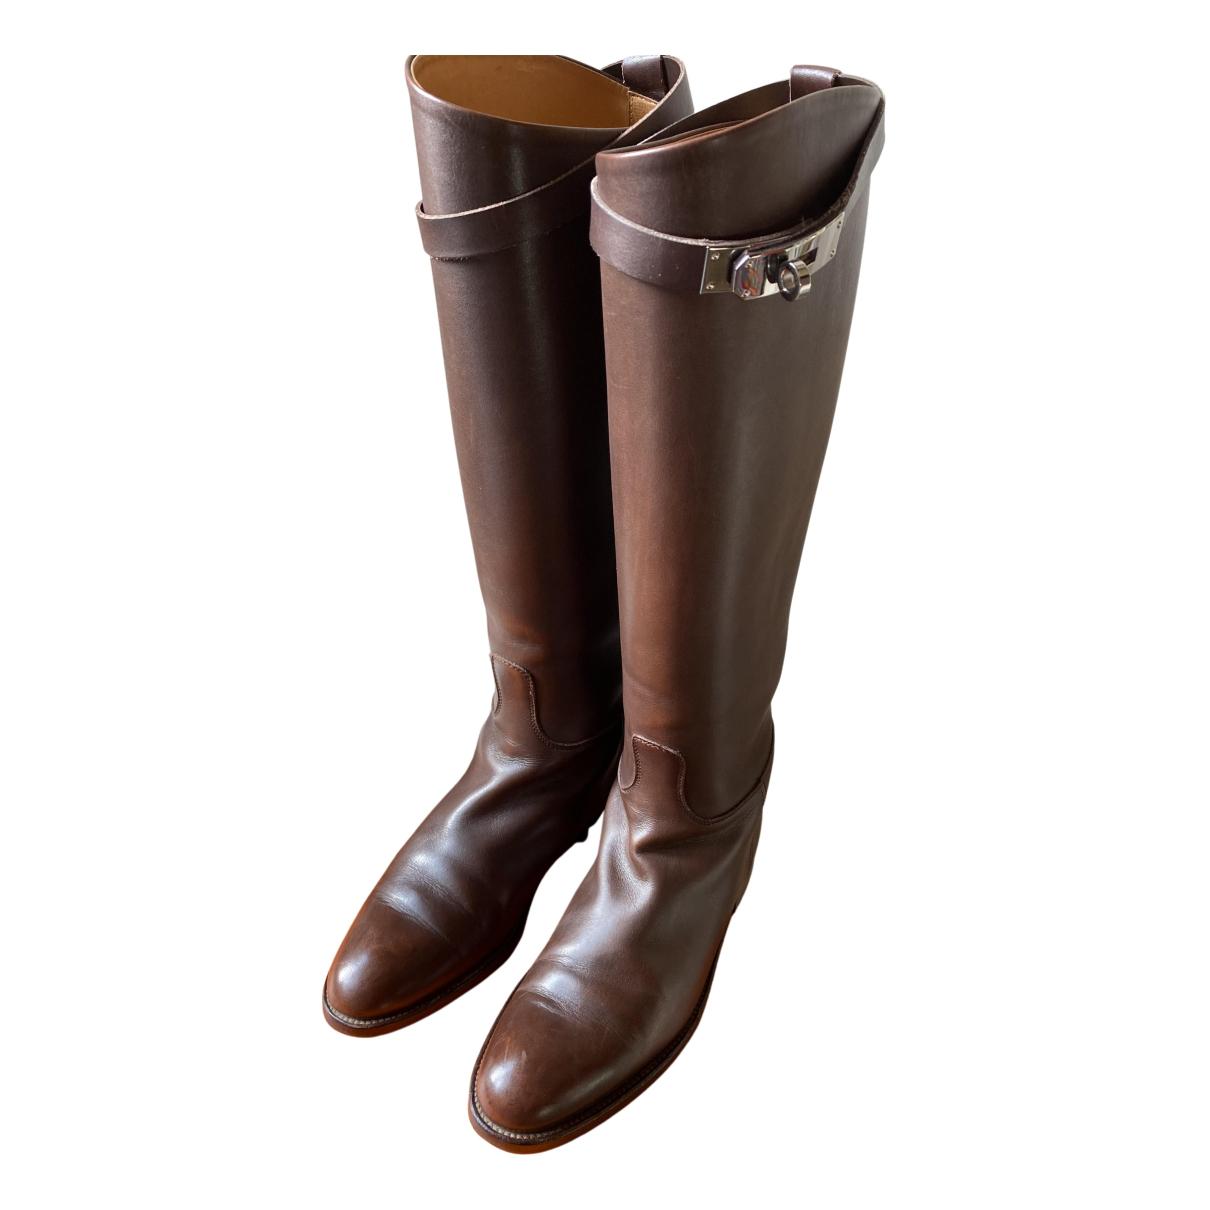 Hermes, Shoes, Hermes Jumping Boots Etoupe Sz 7 37